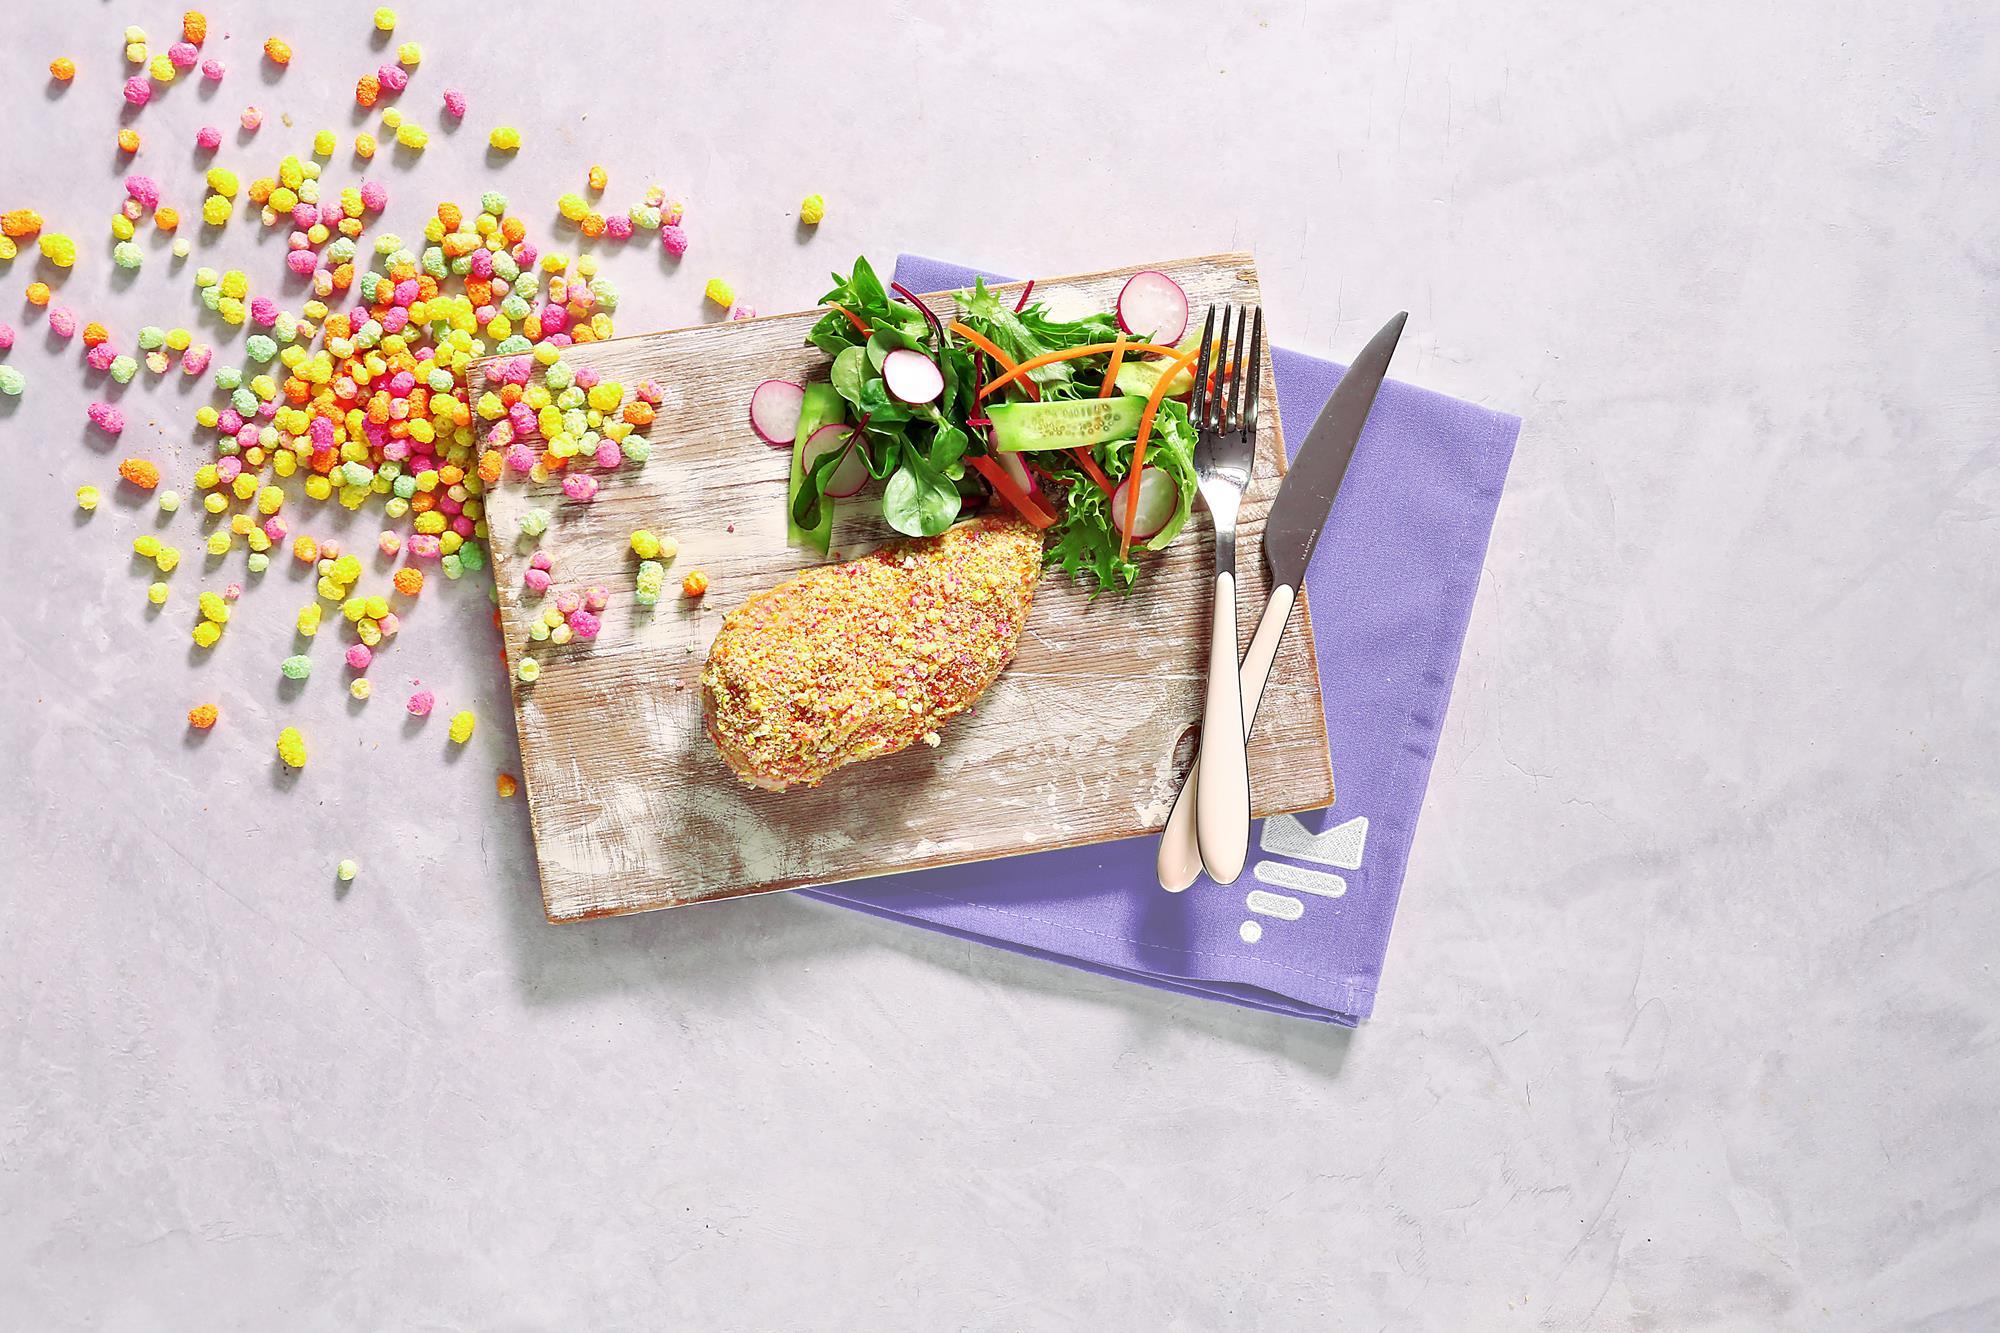 Musclefood combines retro sweets with meat for summer range | News ...